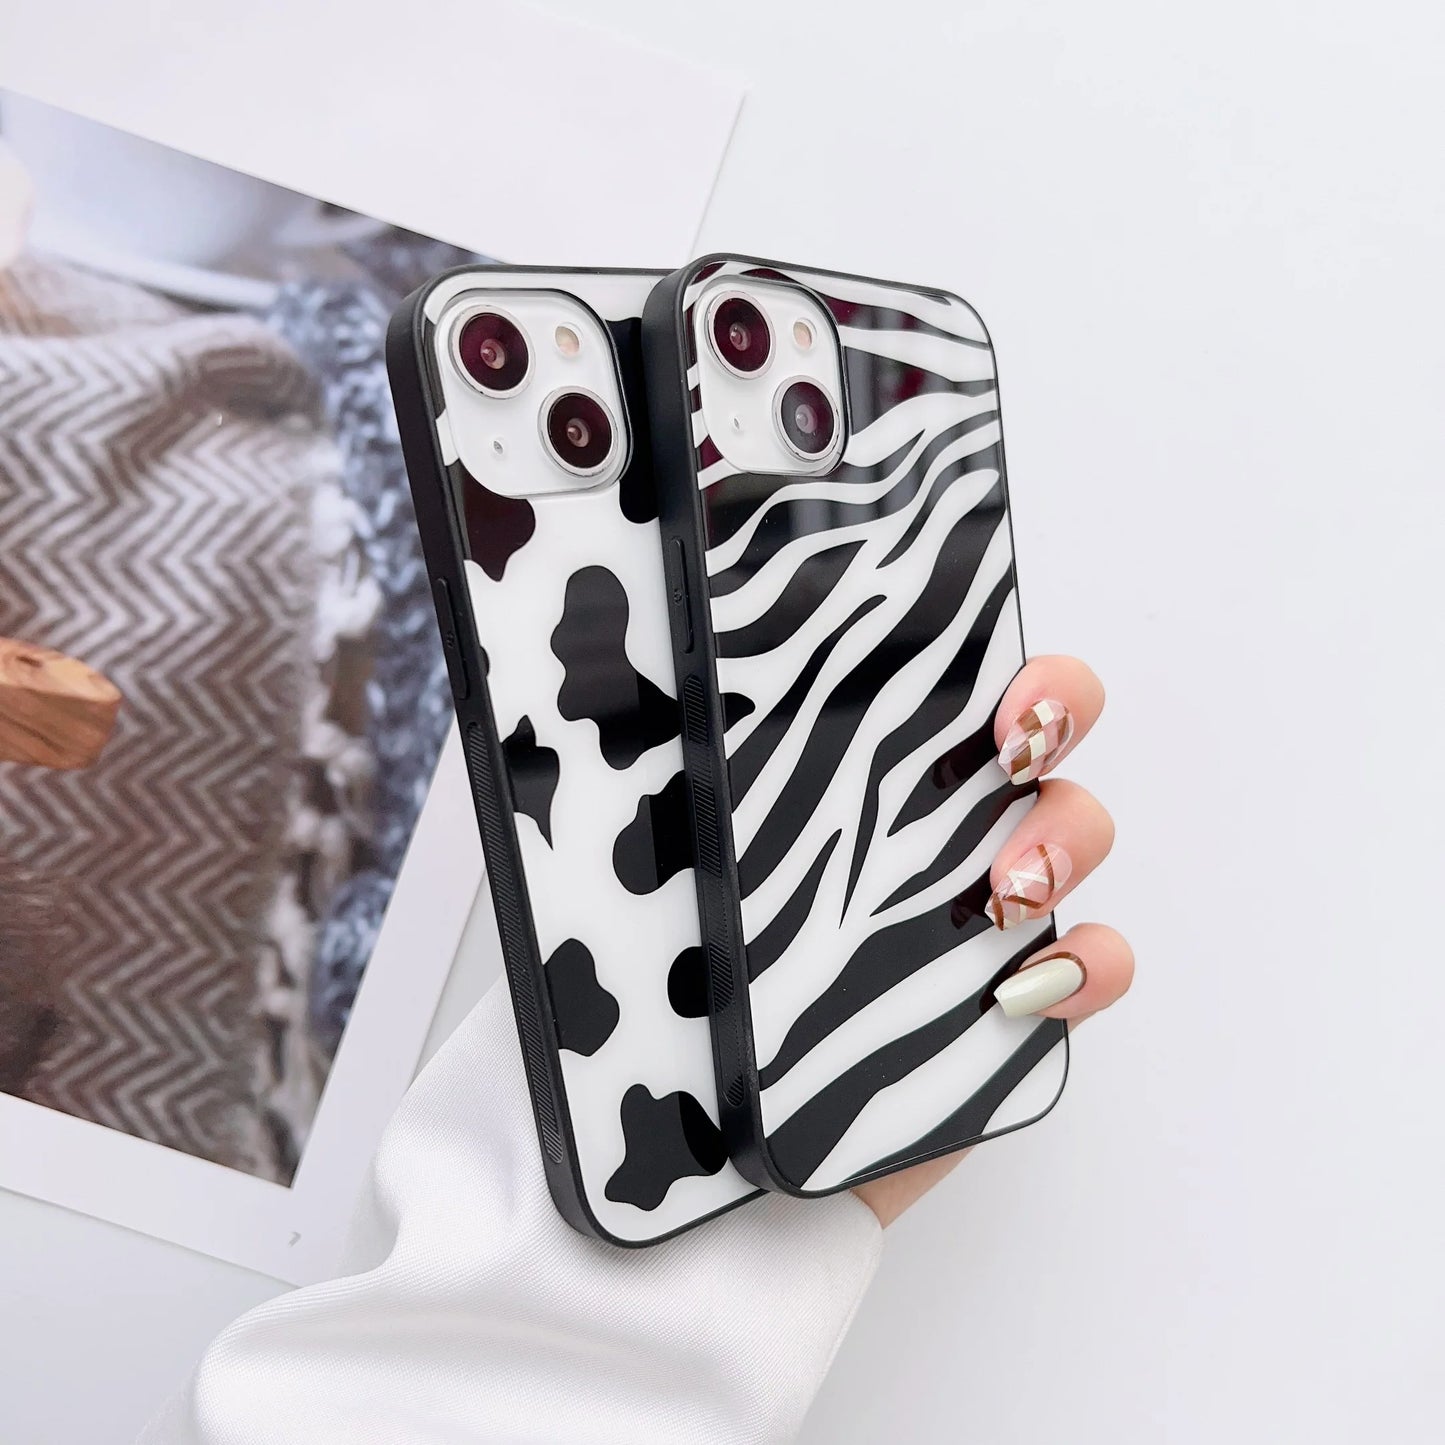 Moo Moo Pattern Glass Case Cover